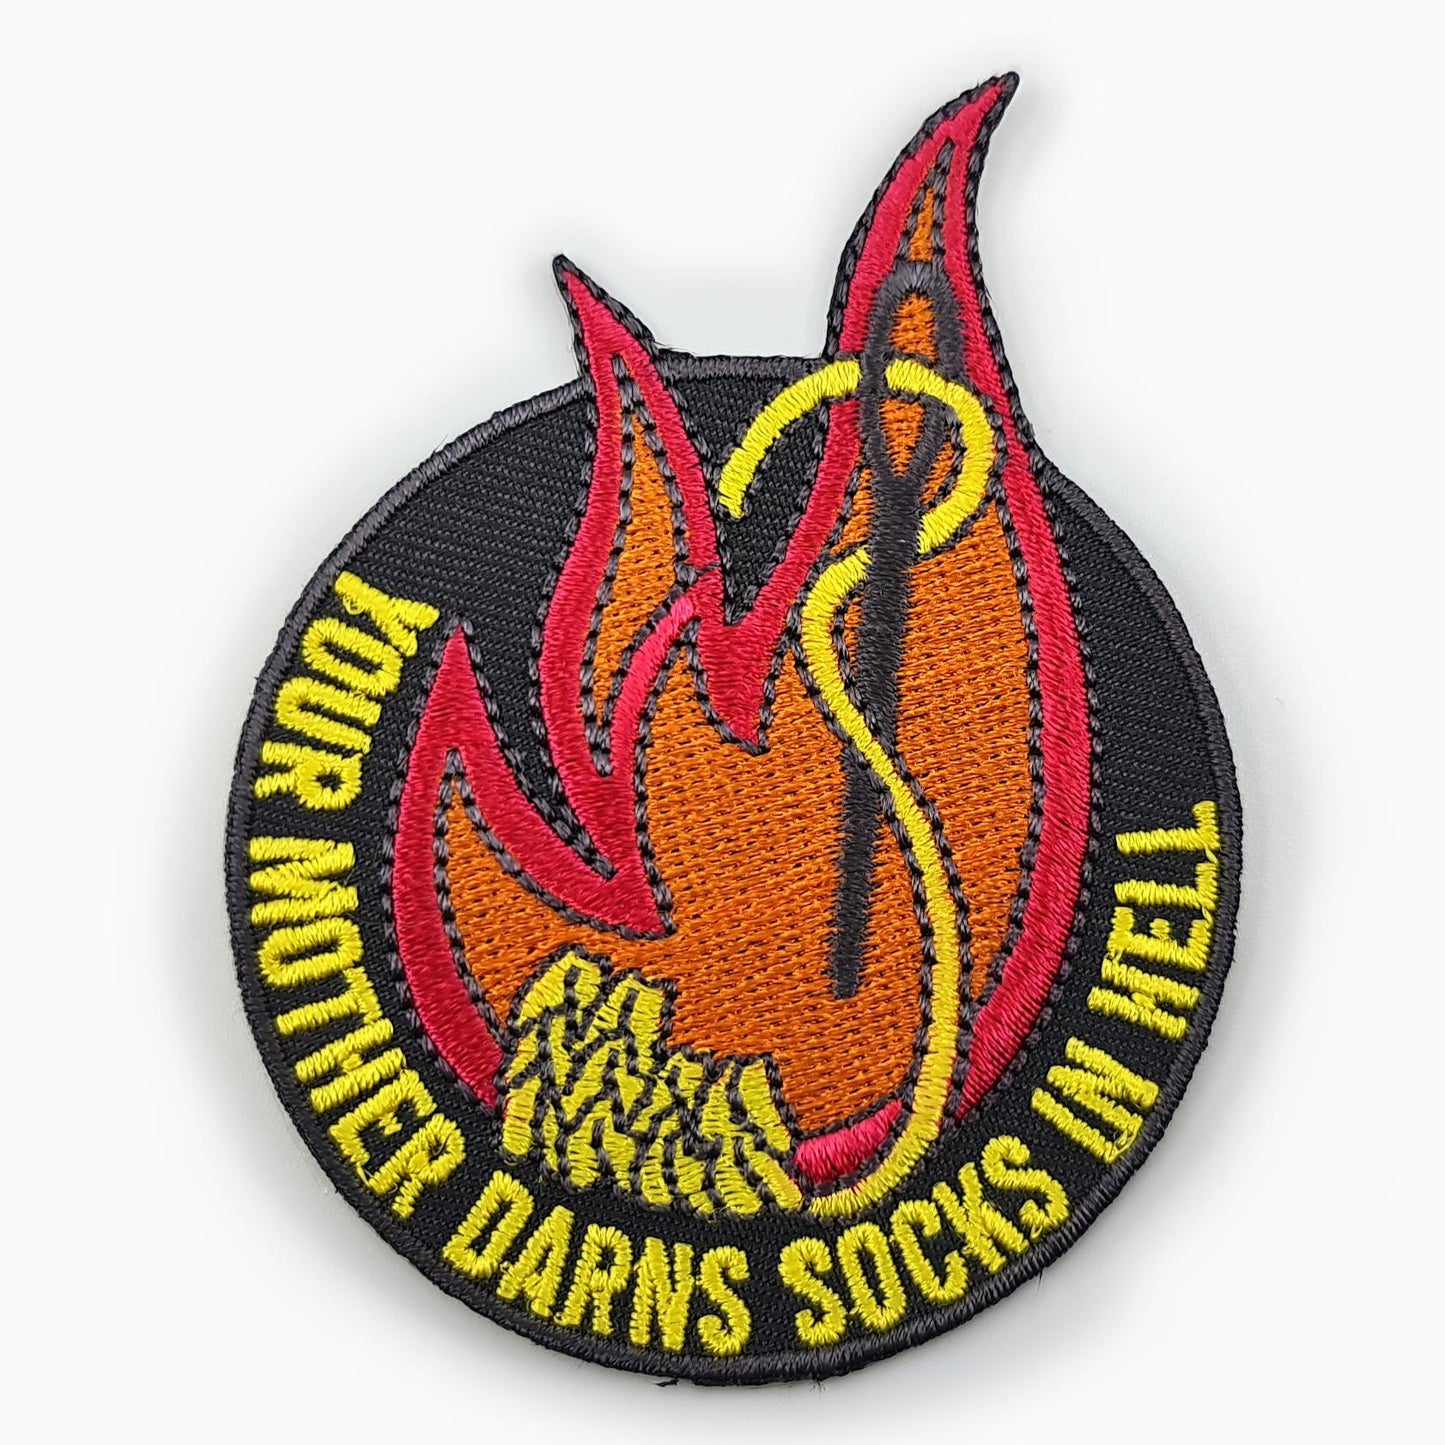 Your Mother Darns Socks in Hell - Embroidered Patch - Undercover Otter